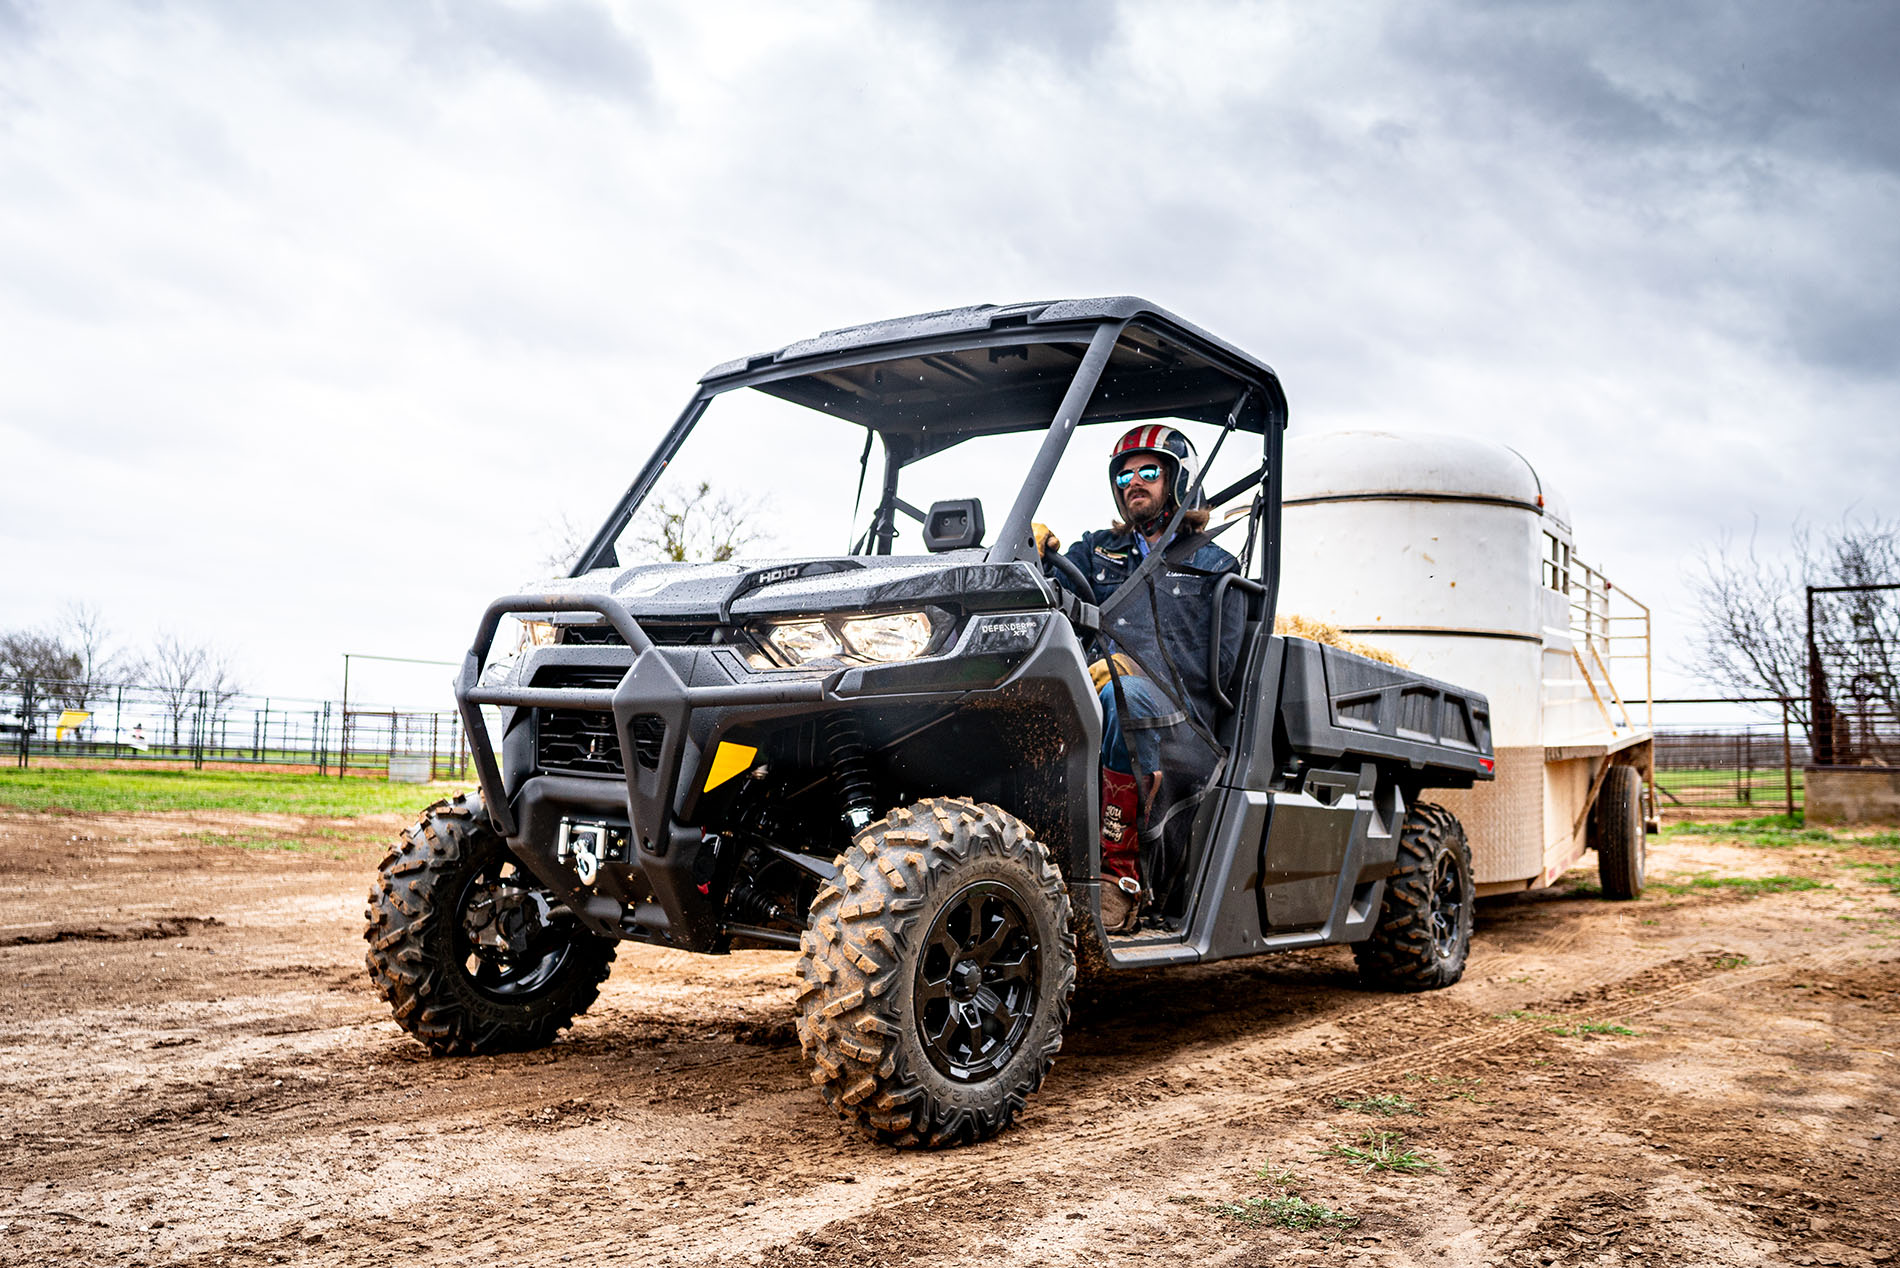 Dale Brisby towing a trailer at the farm with a Can-Am Defender side-by-side